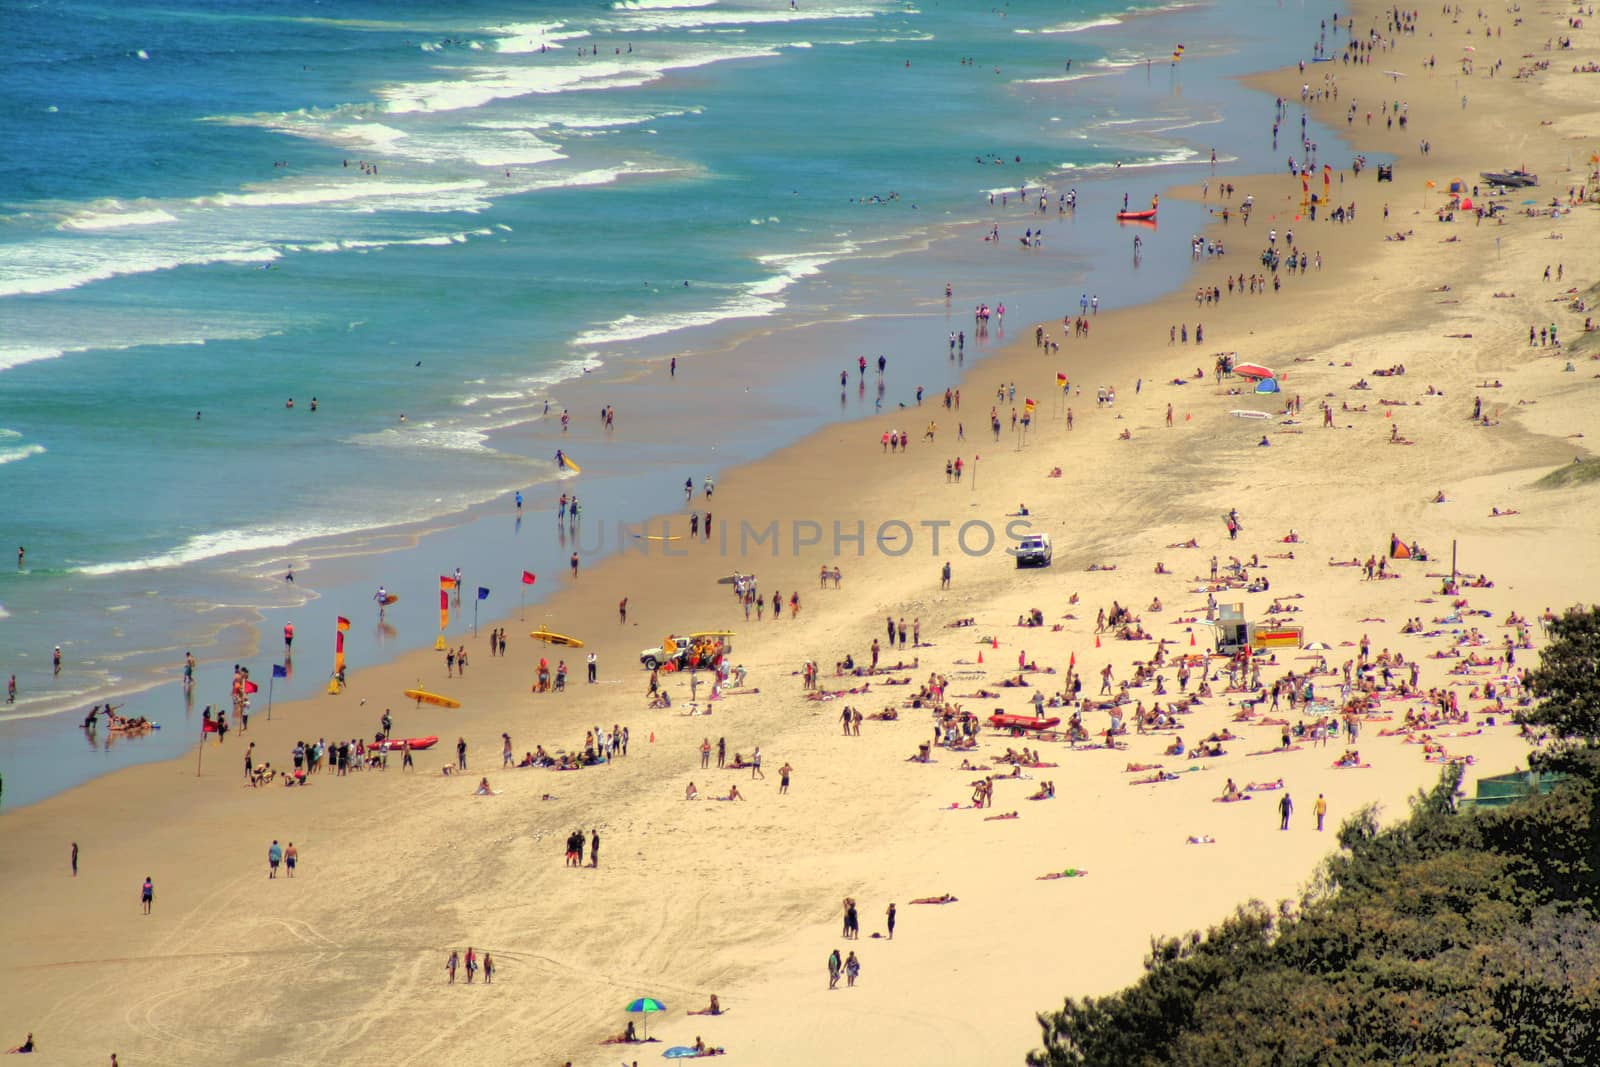 View across Surfers Paradise beach looking South down the Gold Coast Australia.